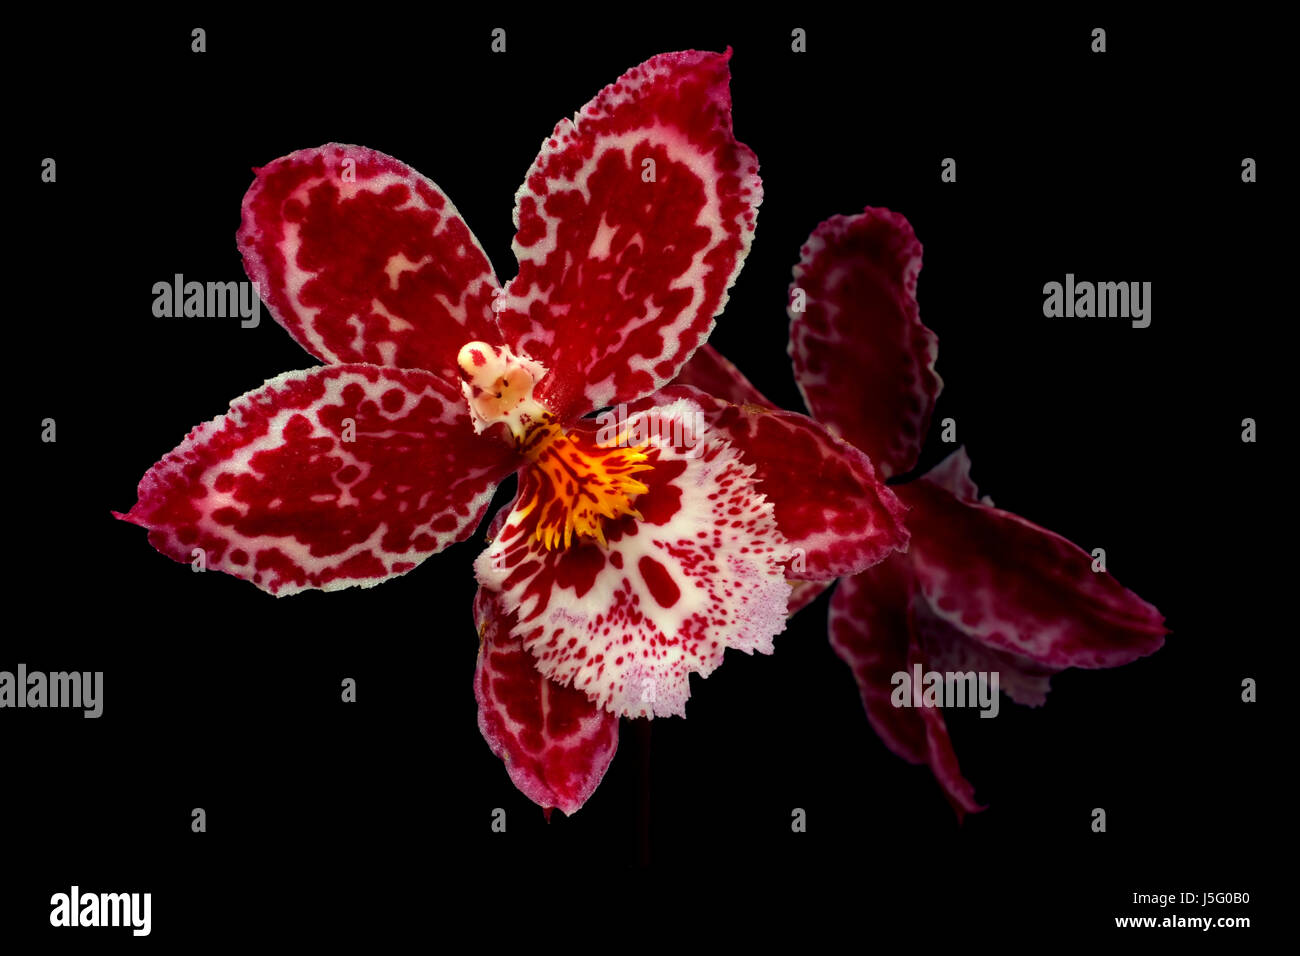 flower plant black swarthy jetblack deep black mother day gift exotic Stock Photo